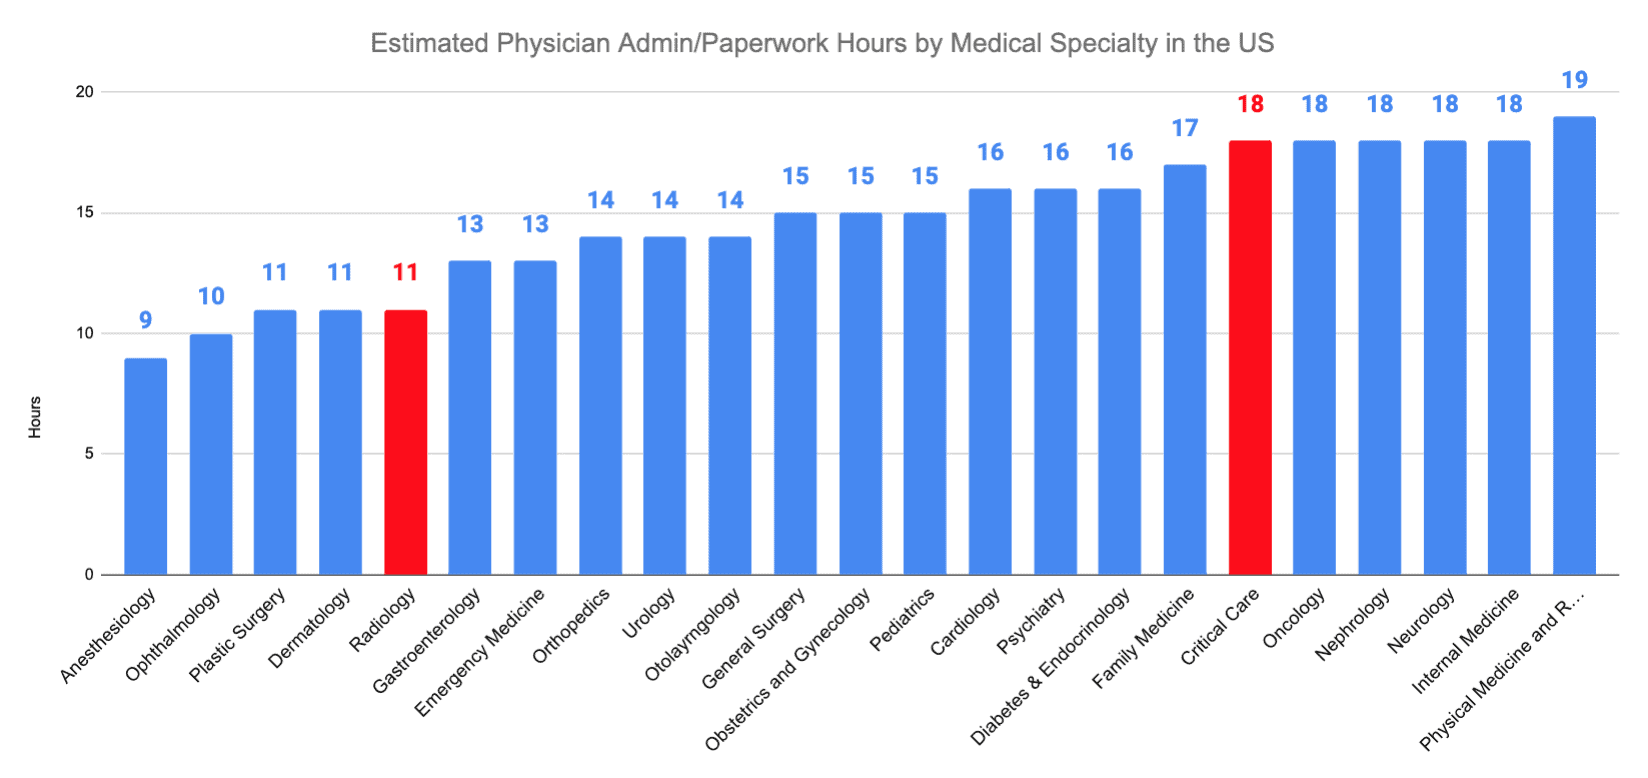 Radiology vs. Critical Care Estimated Physician Admin/Paperwork Hours by Medical Specialty in the US